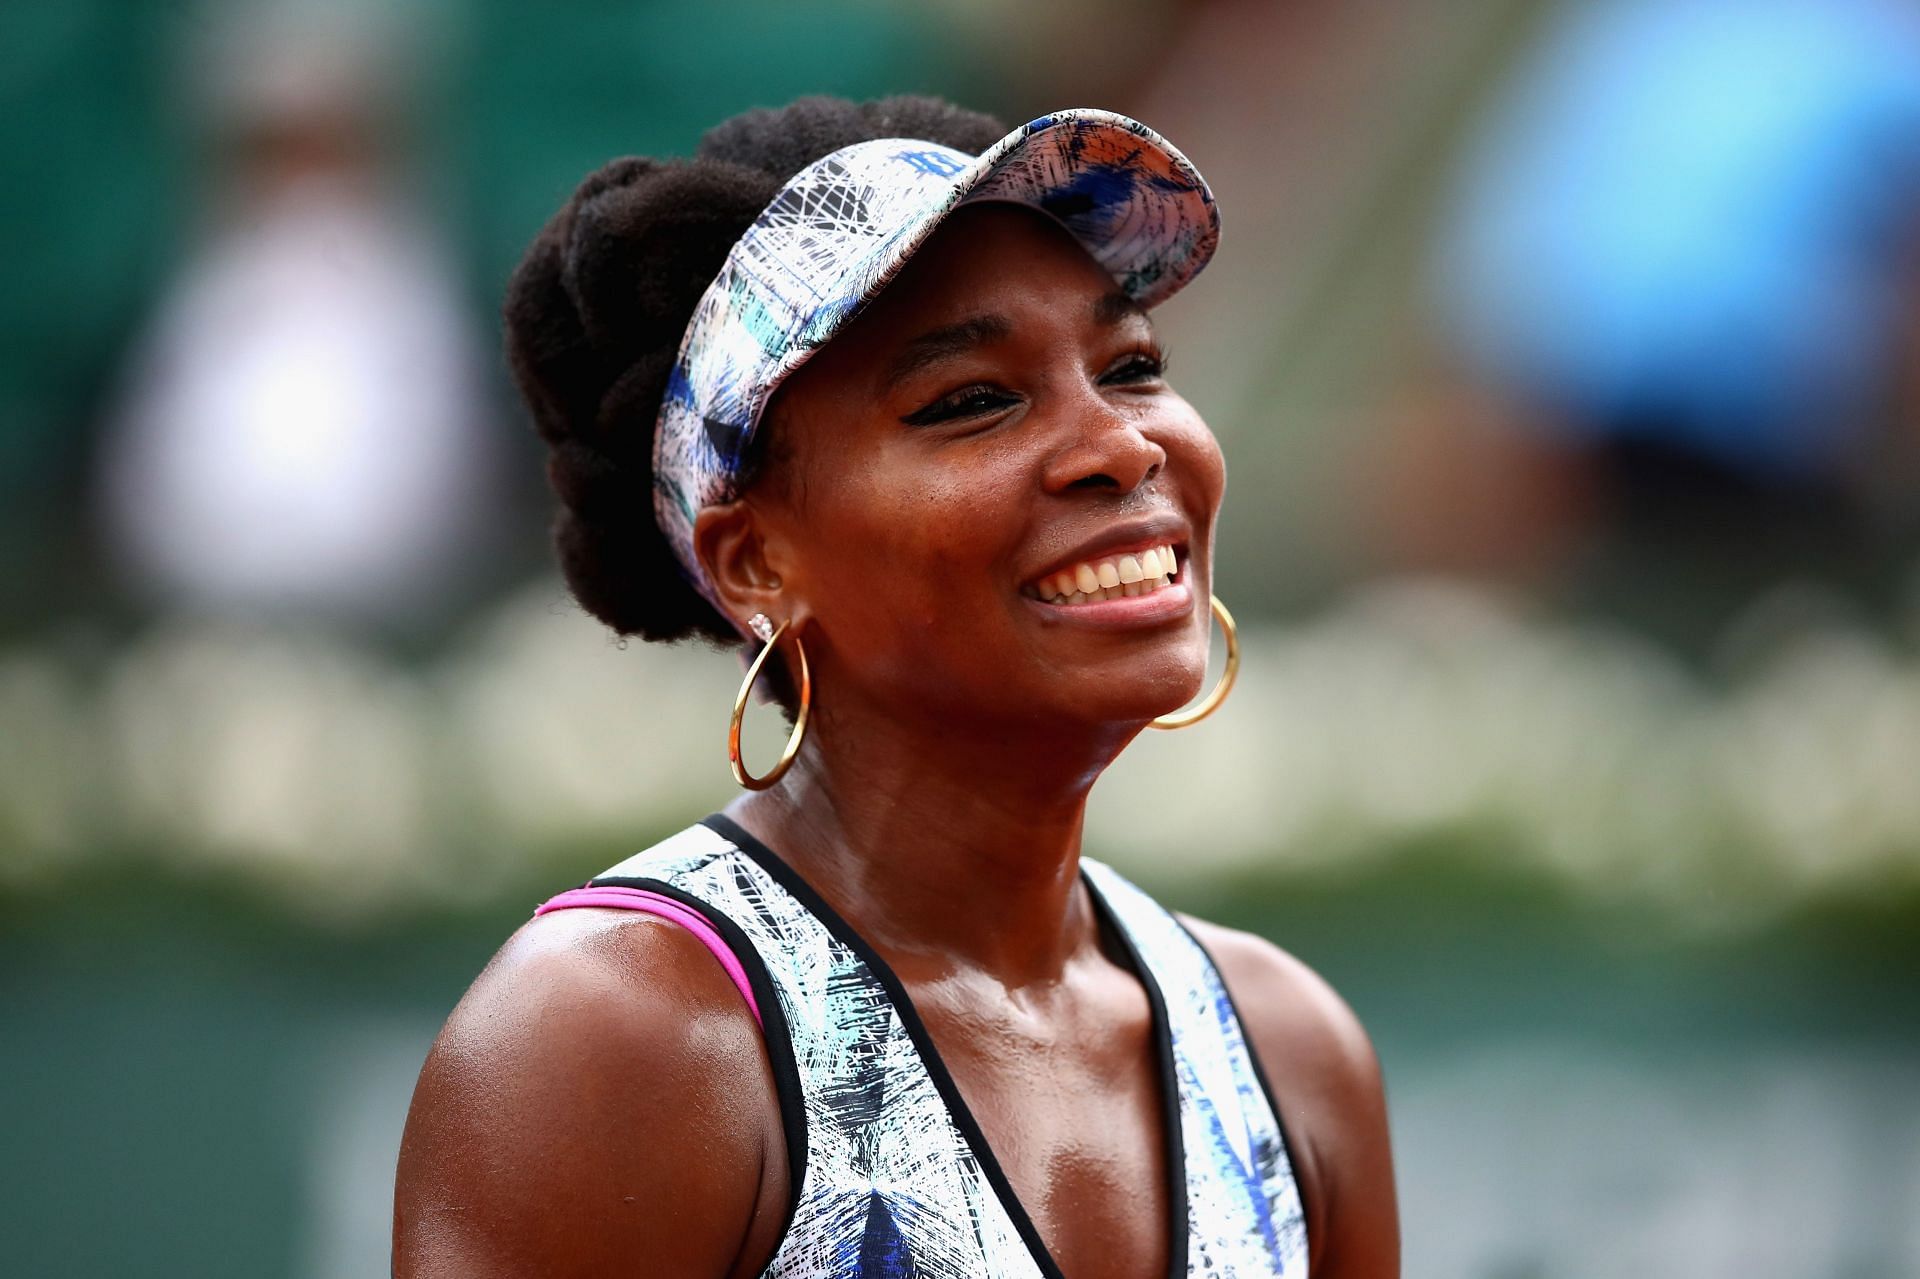 Williams at the 2017 French Open